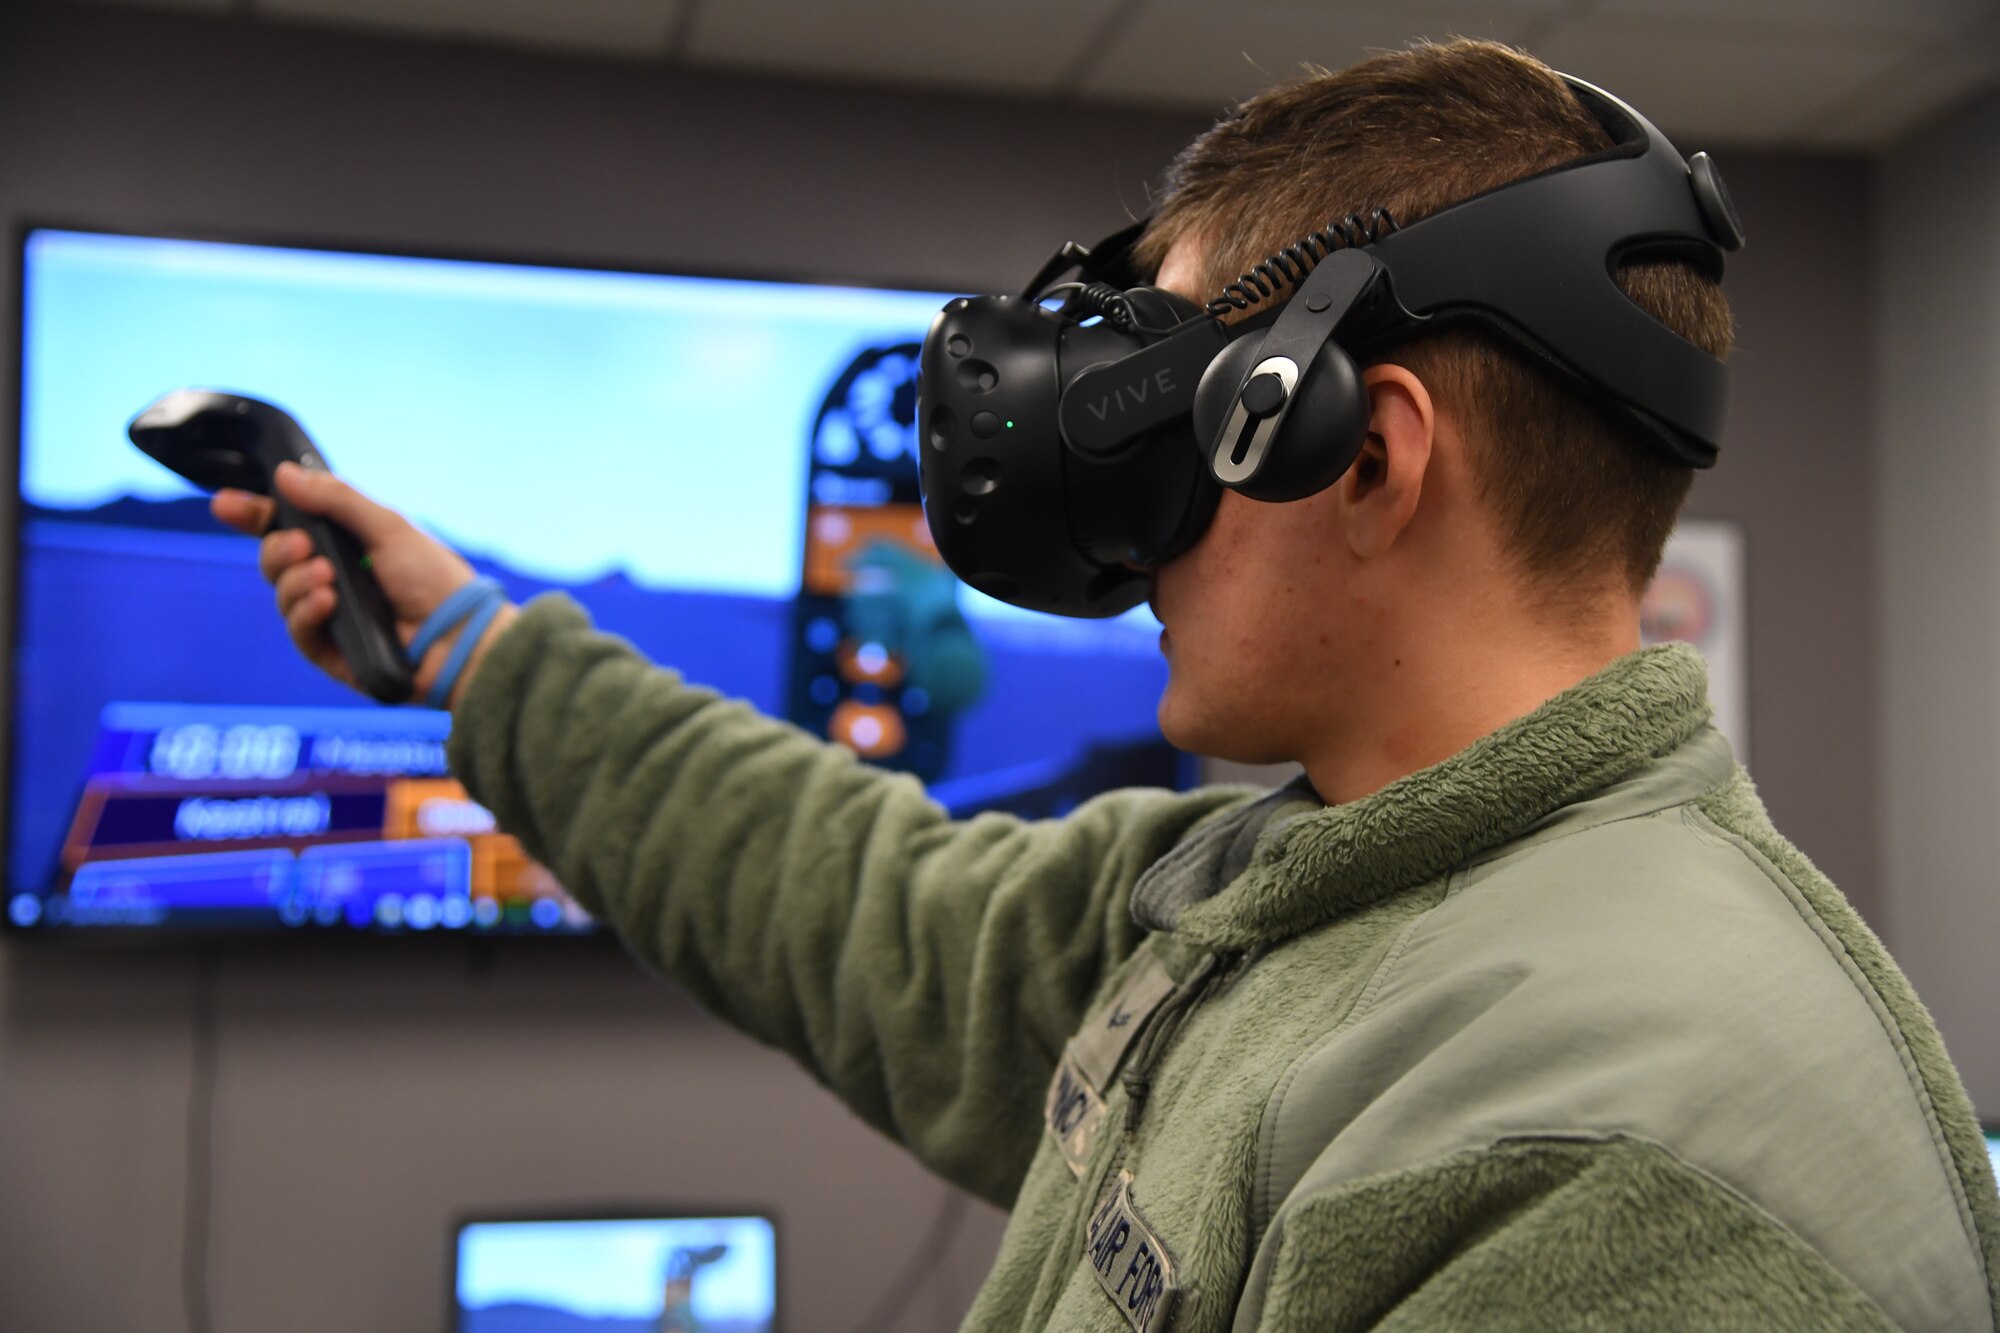 U.S. Air Force Airman 1st Class Ethan Muncy, 335th Training Squadron student, uses virtual reality to observe weather patterns inside the Joint Weather Training Facility at Keesler Air Force Base, Mississippi, Jan. 27, 2020. The weather apprentice course, which graduated 650 students this past year, takes 151 academic days to complete. Approximately 7,400 students go through the 335th TRS's 13 Air Force Specialty Codes each year. (U.S. Air Force photo by Kemberly Groue)